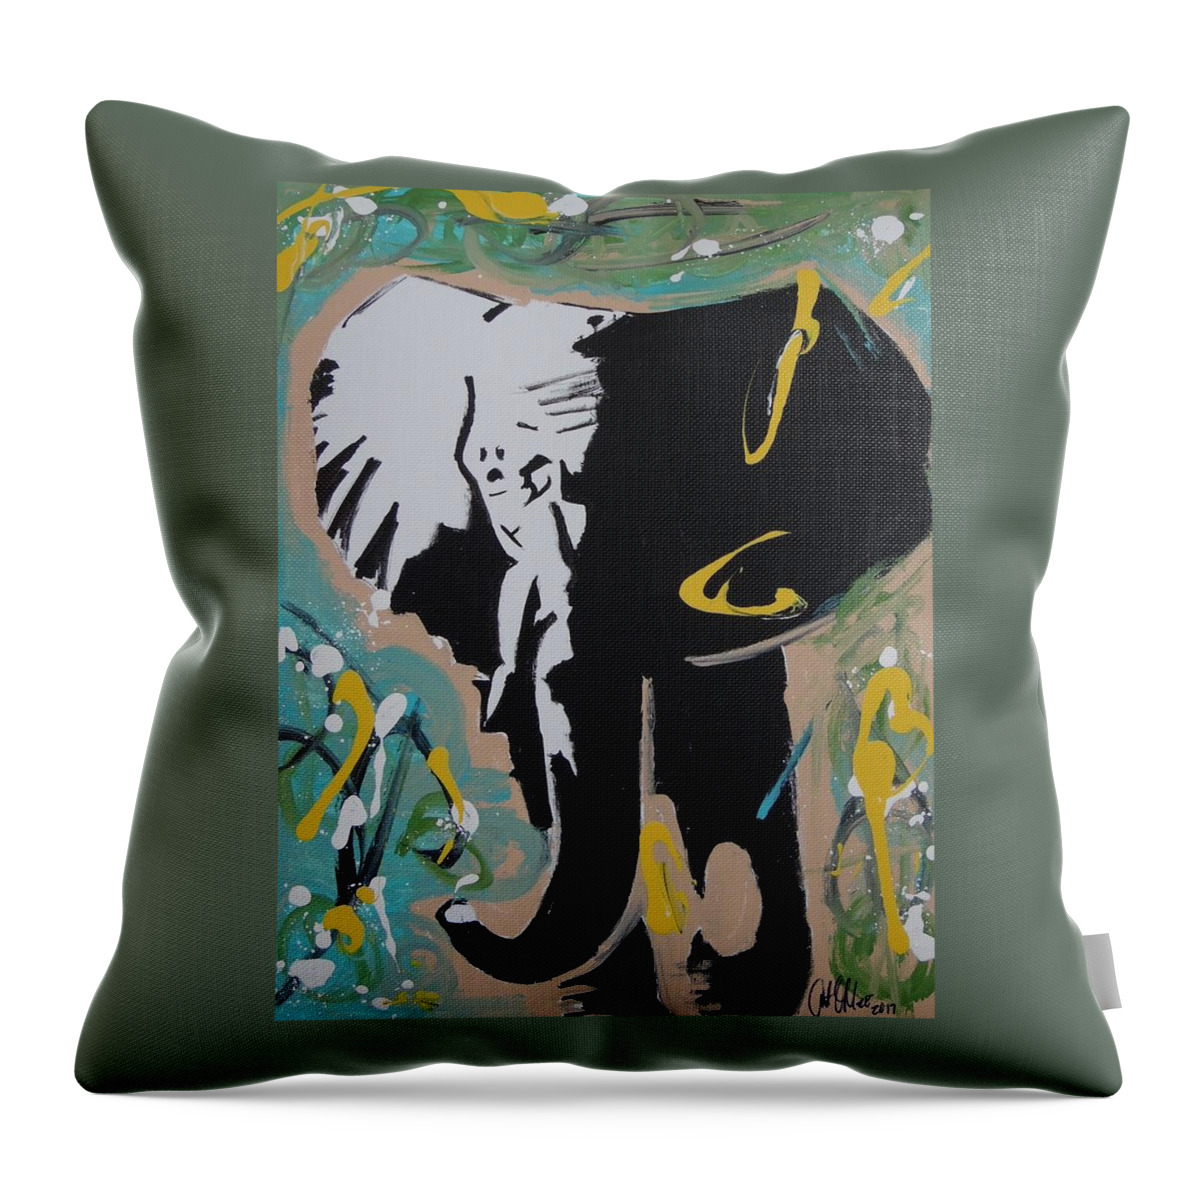 Elephant Throw Pillow featuring the painting King Elephant by Antonio Moore